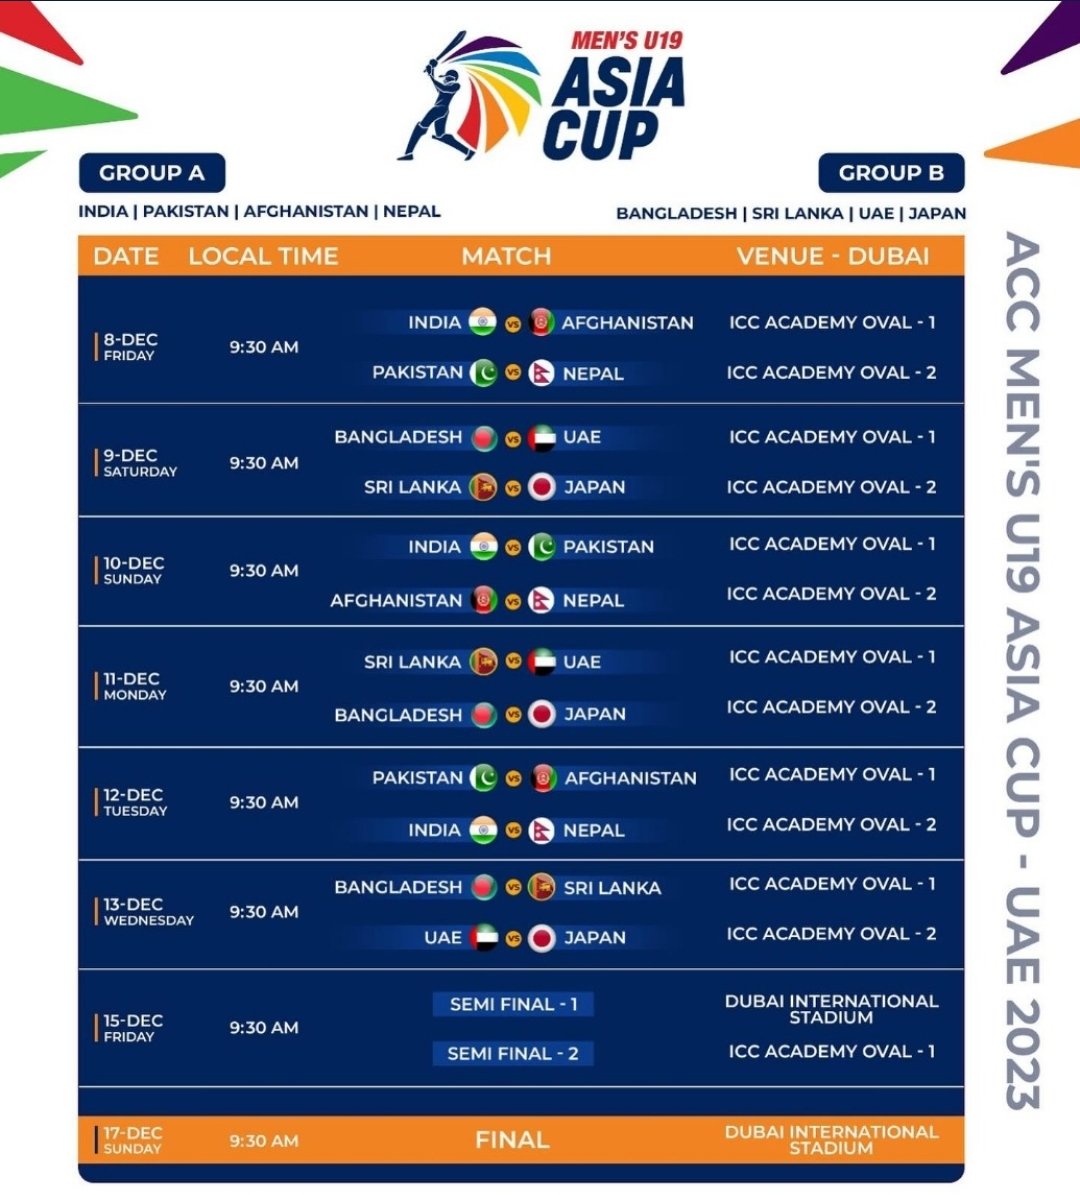 Get ready for an adrenaline-packed ride as Dubai gears up to host the U-19 Men's Asia Cup!

Matches start Friday, December 8th 2023.

#ACCU19MensAsiaCup